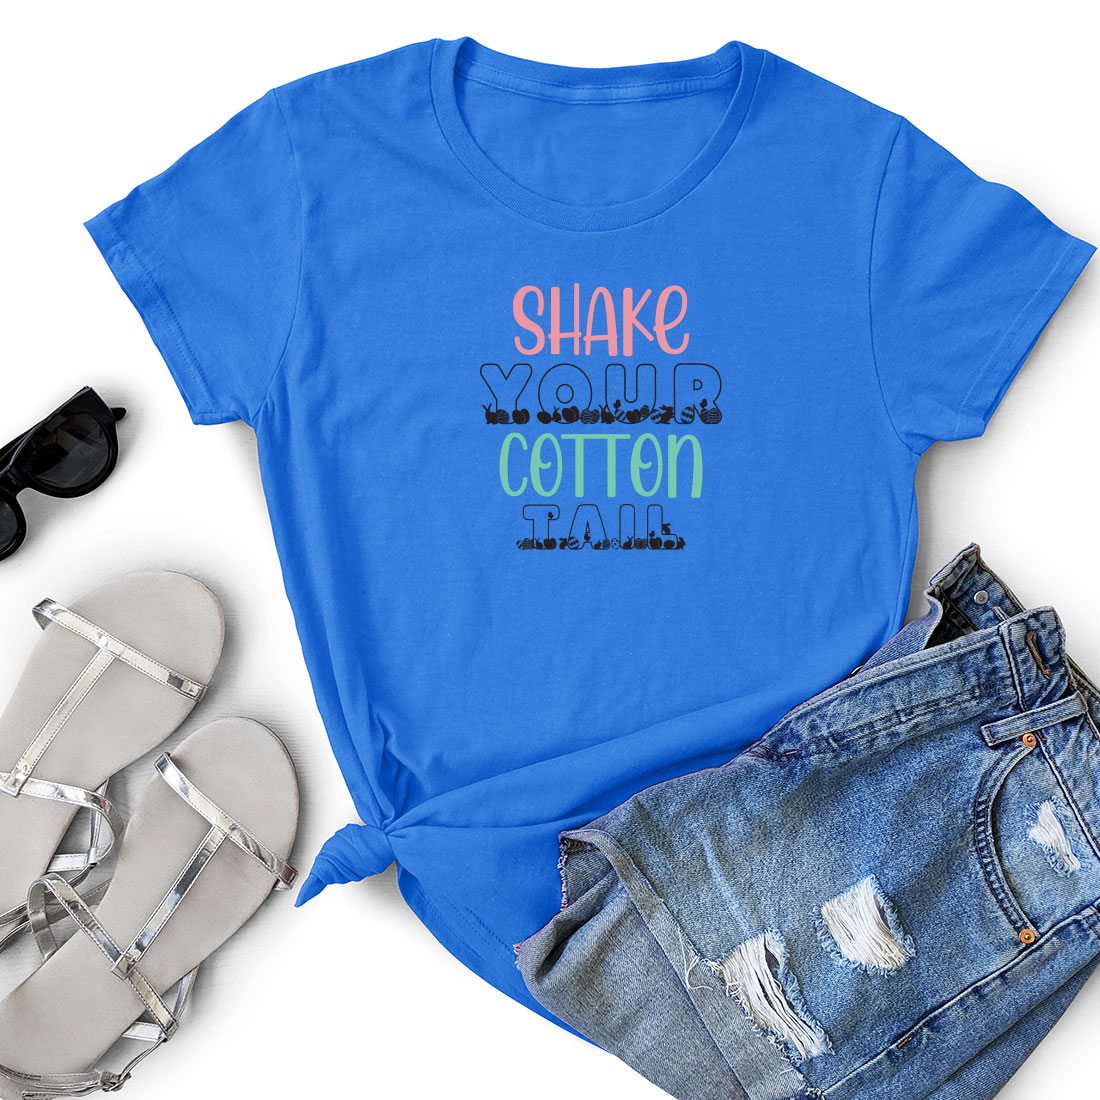 Blue shirt that says shake your cotton on it.